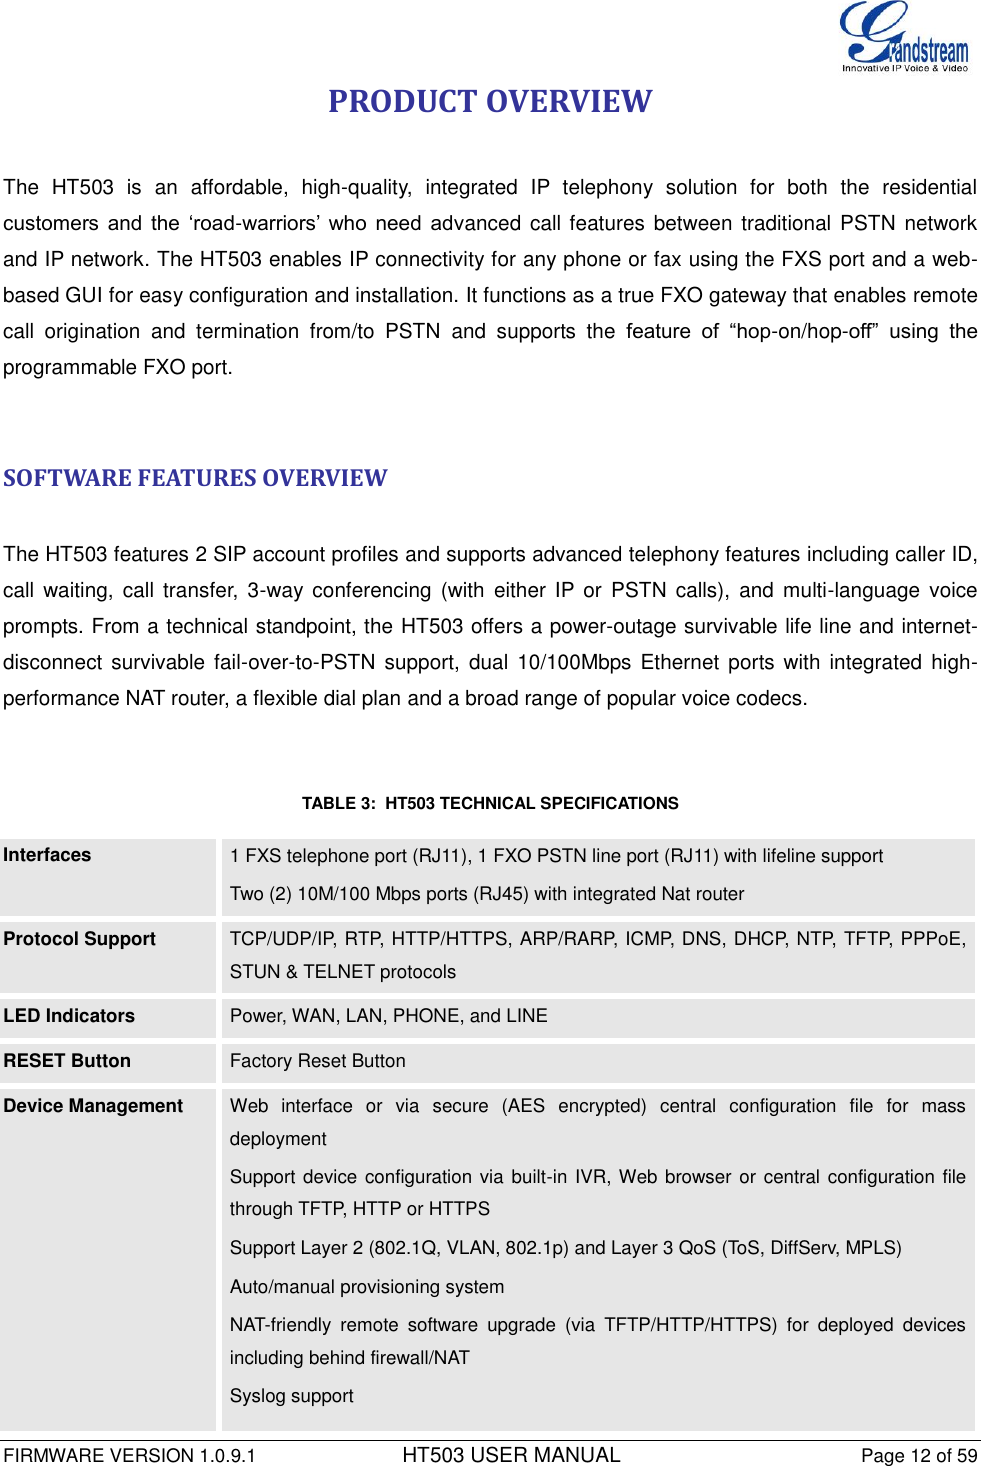  FIRMWARE VERSION 1.0.9.1          HT503 USER MANUAL Page 12 of 59       PRODUCT OVERVIEW  The  HT503  is  an  affordable,  high-quality,  integrated  IP  telephony  solution  for  both  the  residential customers  and  the  ‘road-warriors’  who  need  advanced call features  between traditional PSTN network and IP network. The HT503 enables IP connectivity for any phone or fax using the FXS port and a web-based GUI for easy configuration and installation. It functions as a true FXO gateway that enables remote call  origination  and  termination  from/to  PSTN  and  supports  the  feature  of  “hop-on/hop-off”  using  the programmable FXO port.   SOFTWARE FEATURES OVERVIEW  The HT503 features 2 SIP account profiles and supports advanced telephony features including caller ID, call  waiting,  call  transfer,  3-way conferencing  (with  either  IP or  PSTN  calls),  and multi-language  voice prompts. From a technical standpoint, the HT503 offers a power-outage survivable life line and internet-disconnect  survivable fail-over-to-PSTN  support,  dual  10/100Mbps  Ethernet  ports with integrated  high-performance NAT router, a flexible dial plan and a broad range of popular voice codecs.    TABLE 3:  HT503 TECHNICAL SPECIFICATIONS  Interfaces 1 FXS telephone port (RJ11), 1 FXO PSTN line port (RJ11) with lifeline support Two (2) 10M/100 Mbps ports (RJ45) with integrated Nat router Protocol Support  TCP/UDP/IP, RTP, HTTP/HTTPS, ARP/RARP, ICMP, DNS, DHCP, NTP, TFTP, PPPoE, STUN &amp; TELNET protocols LED Indicators  Power, WAN, LAN, PHONE, and LINE RESET Button Factory Reset Button Device Management        Web  interface  or  via  secure  (AES  encrypted)  central  configuration  file  for  mass deployment Support device configuration via built-in IVR, Web browser  or  central configuration file through TFTP, HTTP or HTTPS Support Layer 2 (802.1Q, VLAN, 802.1p) and Layer 3 QoS (ToS, DiffServ, MPLS) Auto/manual provisioning system NAT-friendly  remote  software  upgrade  (via  TFTP/HTTP/HTTPS)  for  deployed  devices including behind firewall/NAT Syslog support 